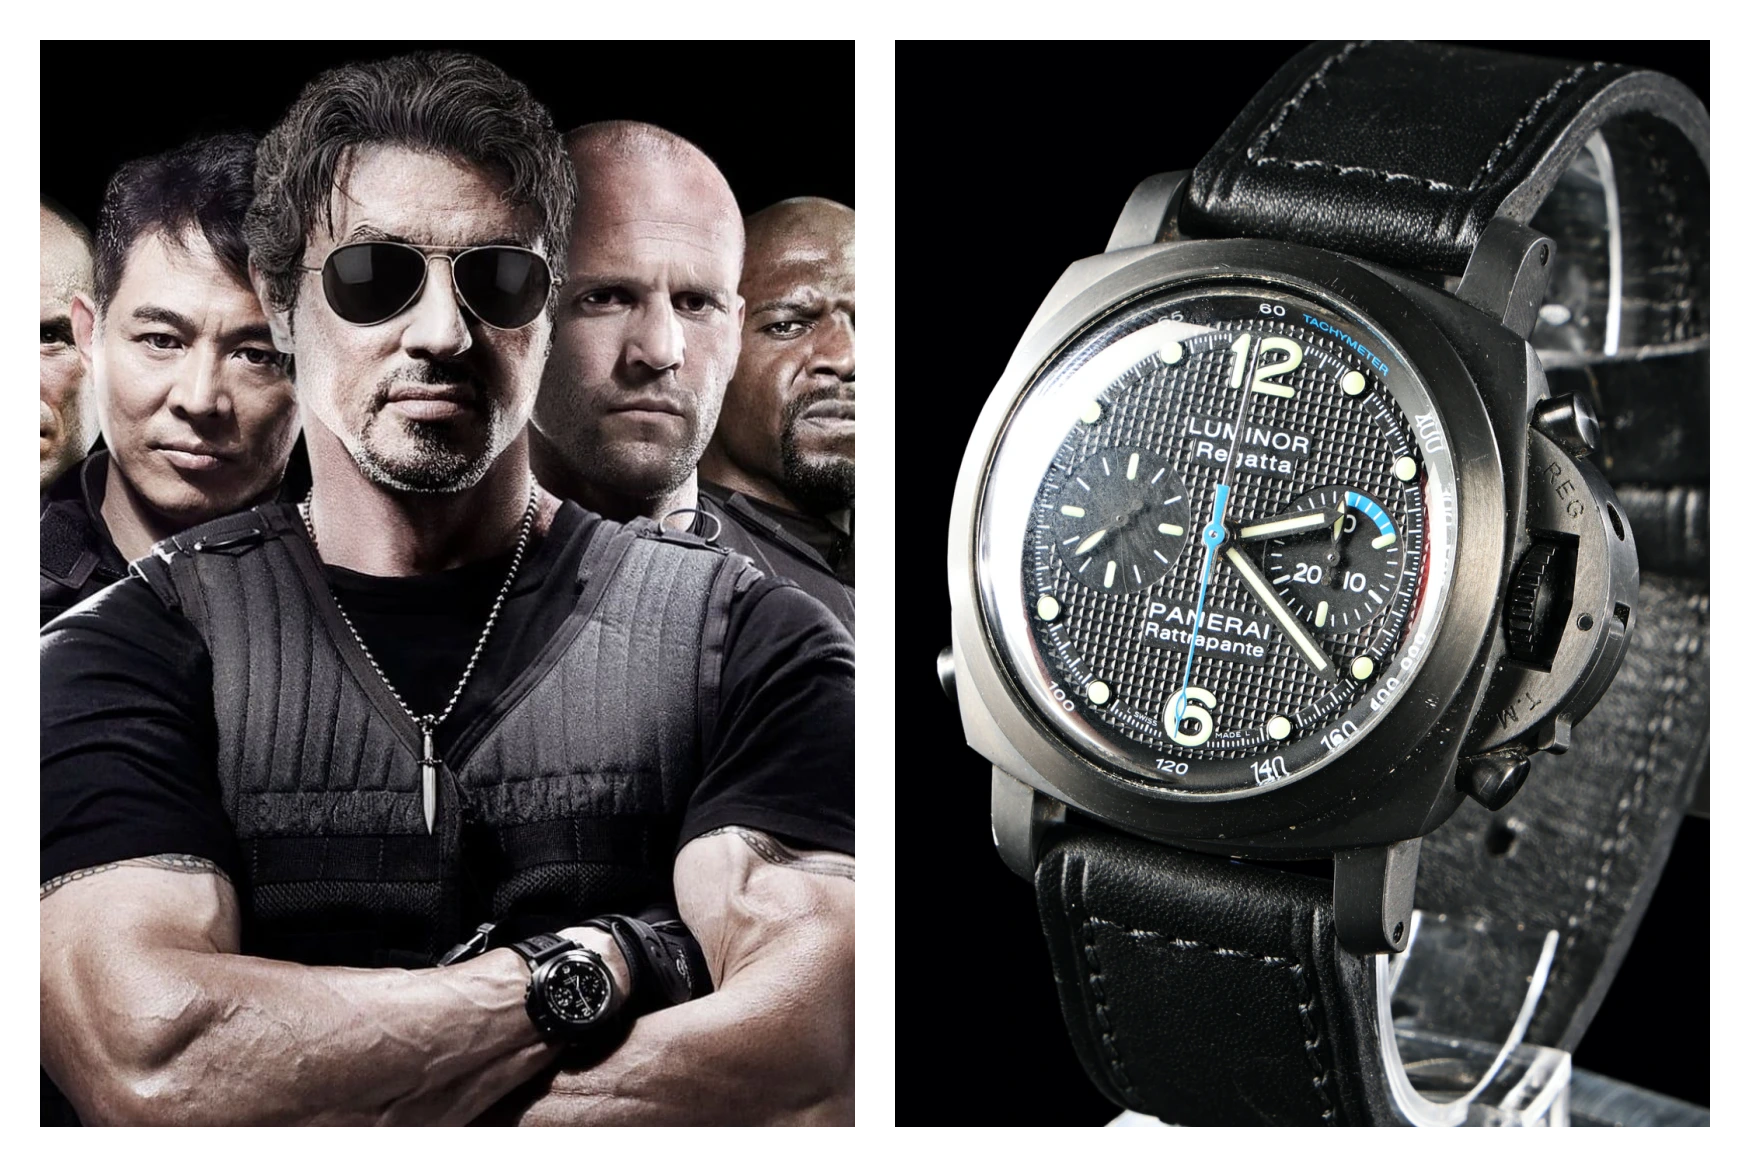 Sylvester Stallone Panerai The Expendables Auction Body